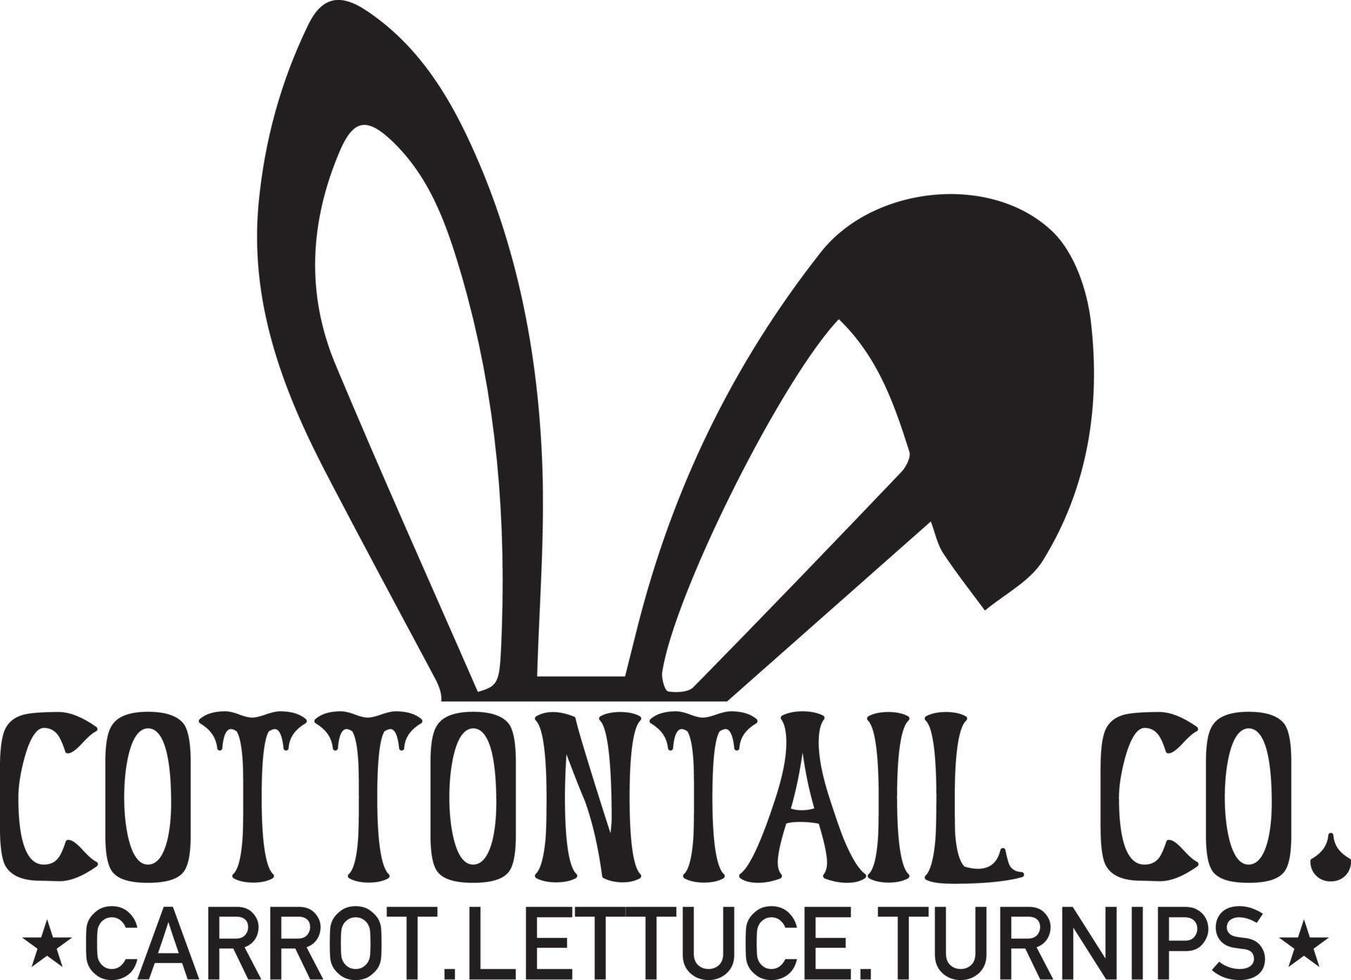 Cottontail co. Carrot.lettuce.turnips vector